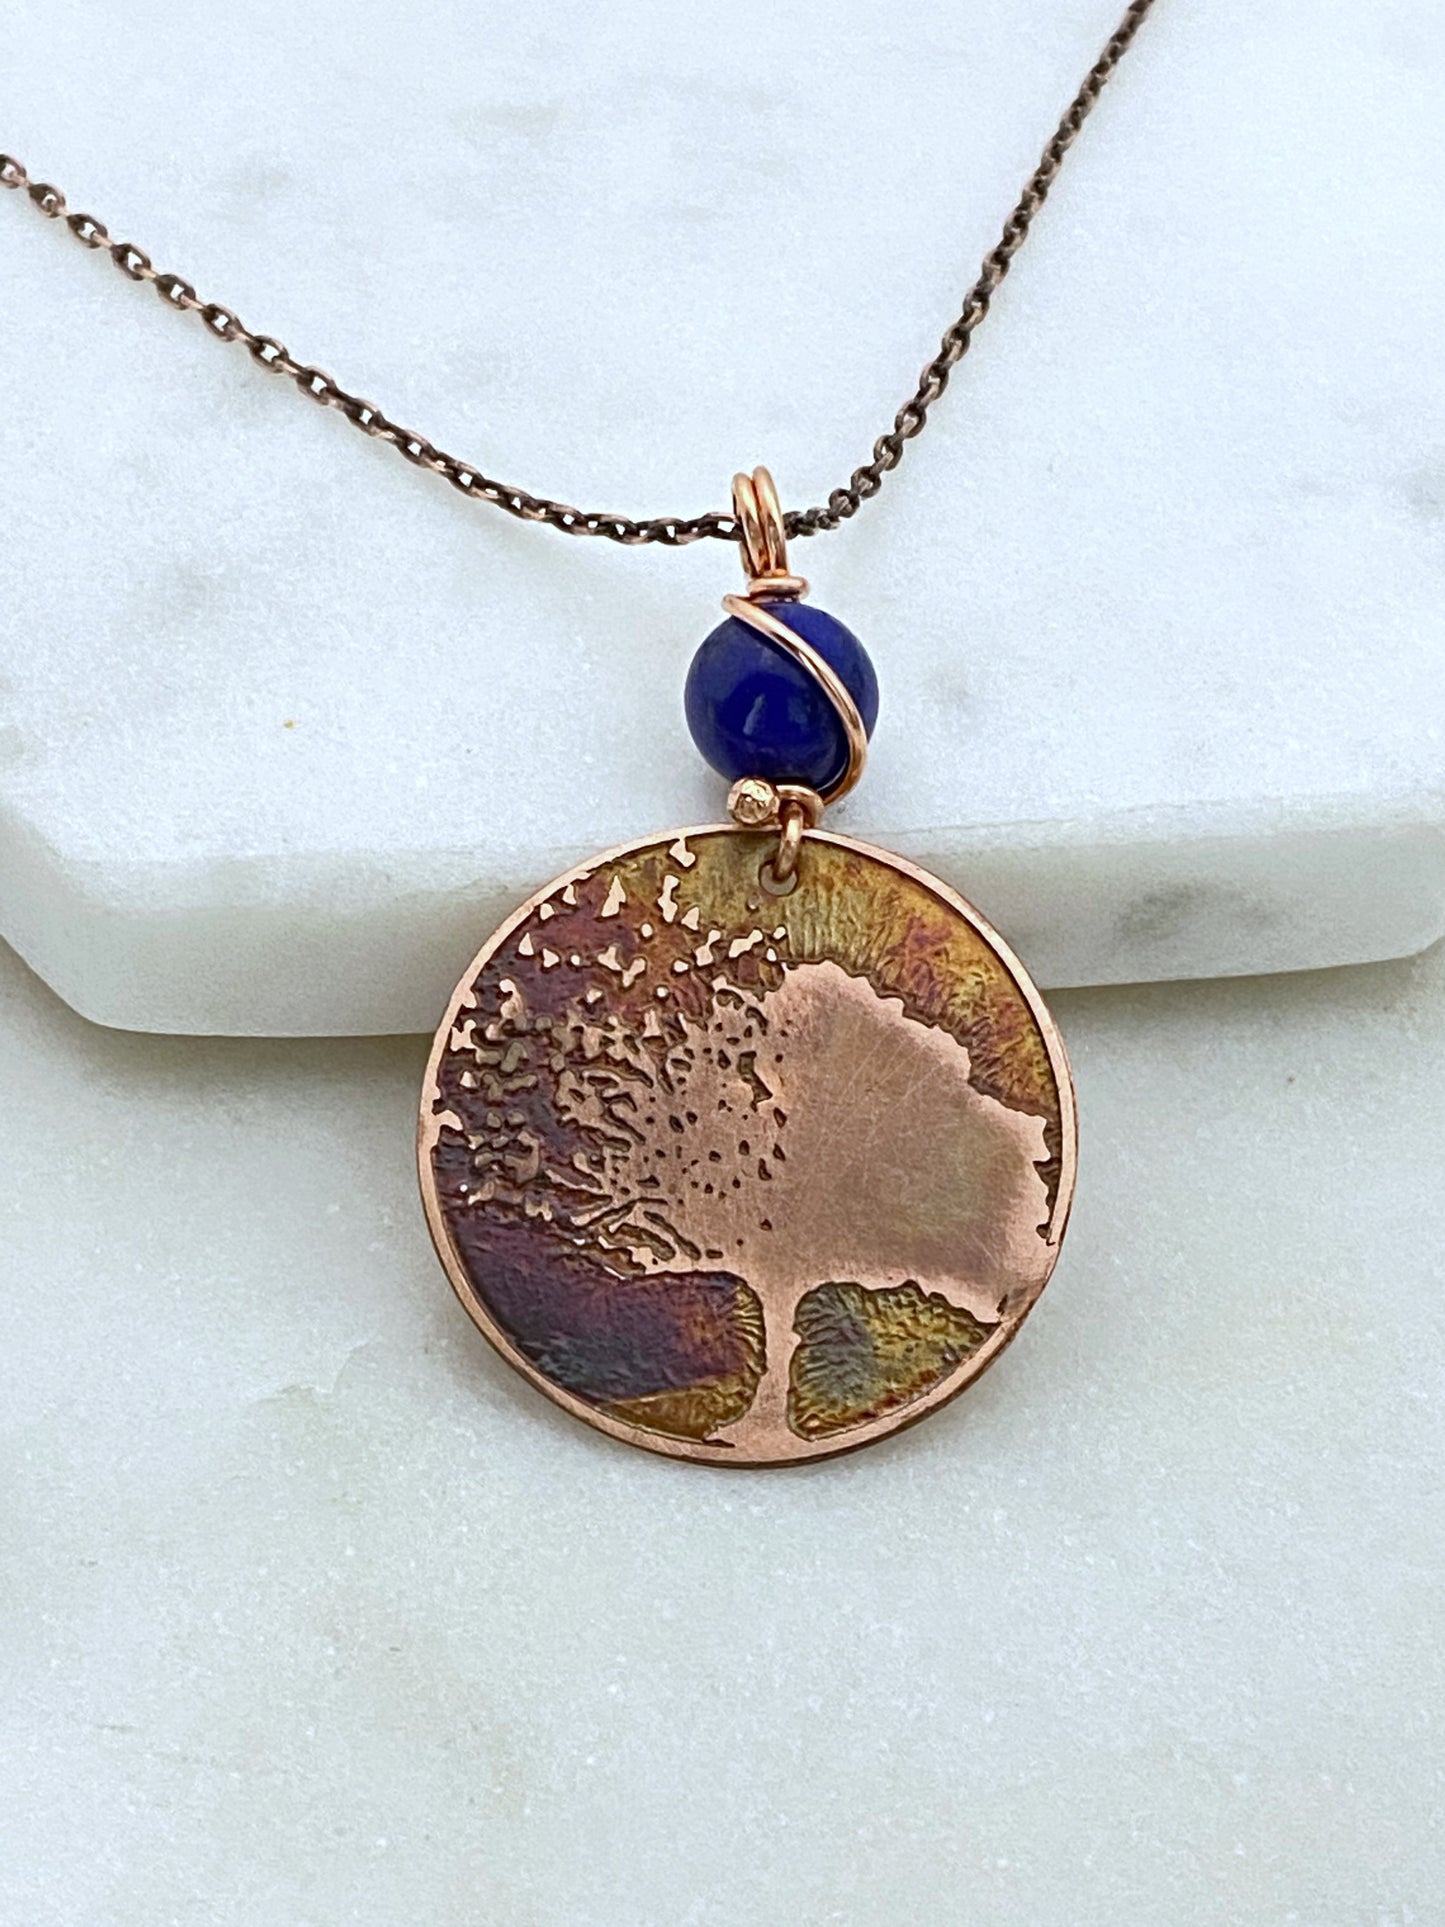 Acid etched copper blowing tree necklace with lapis gemstone